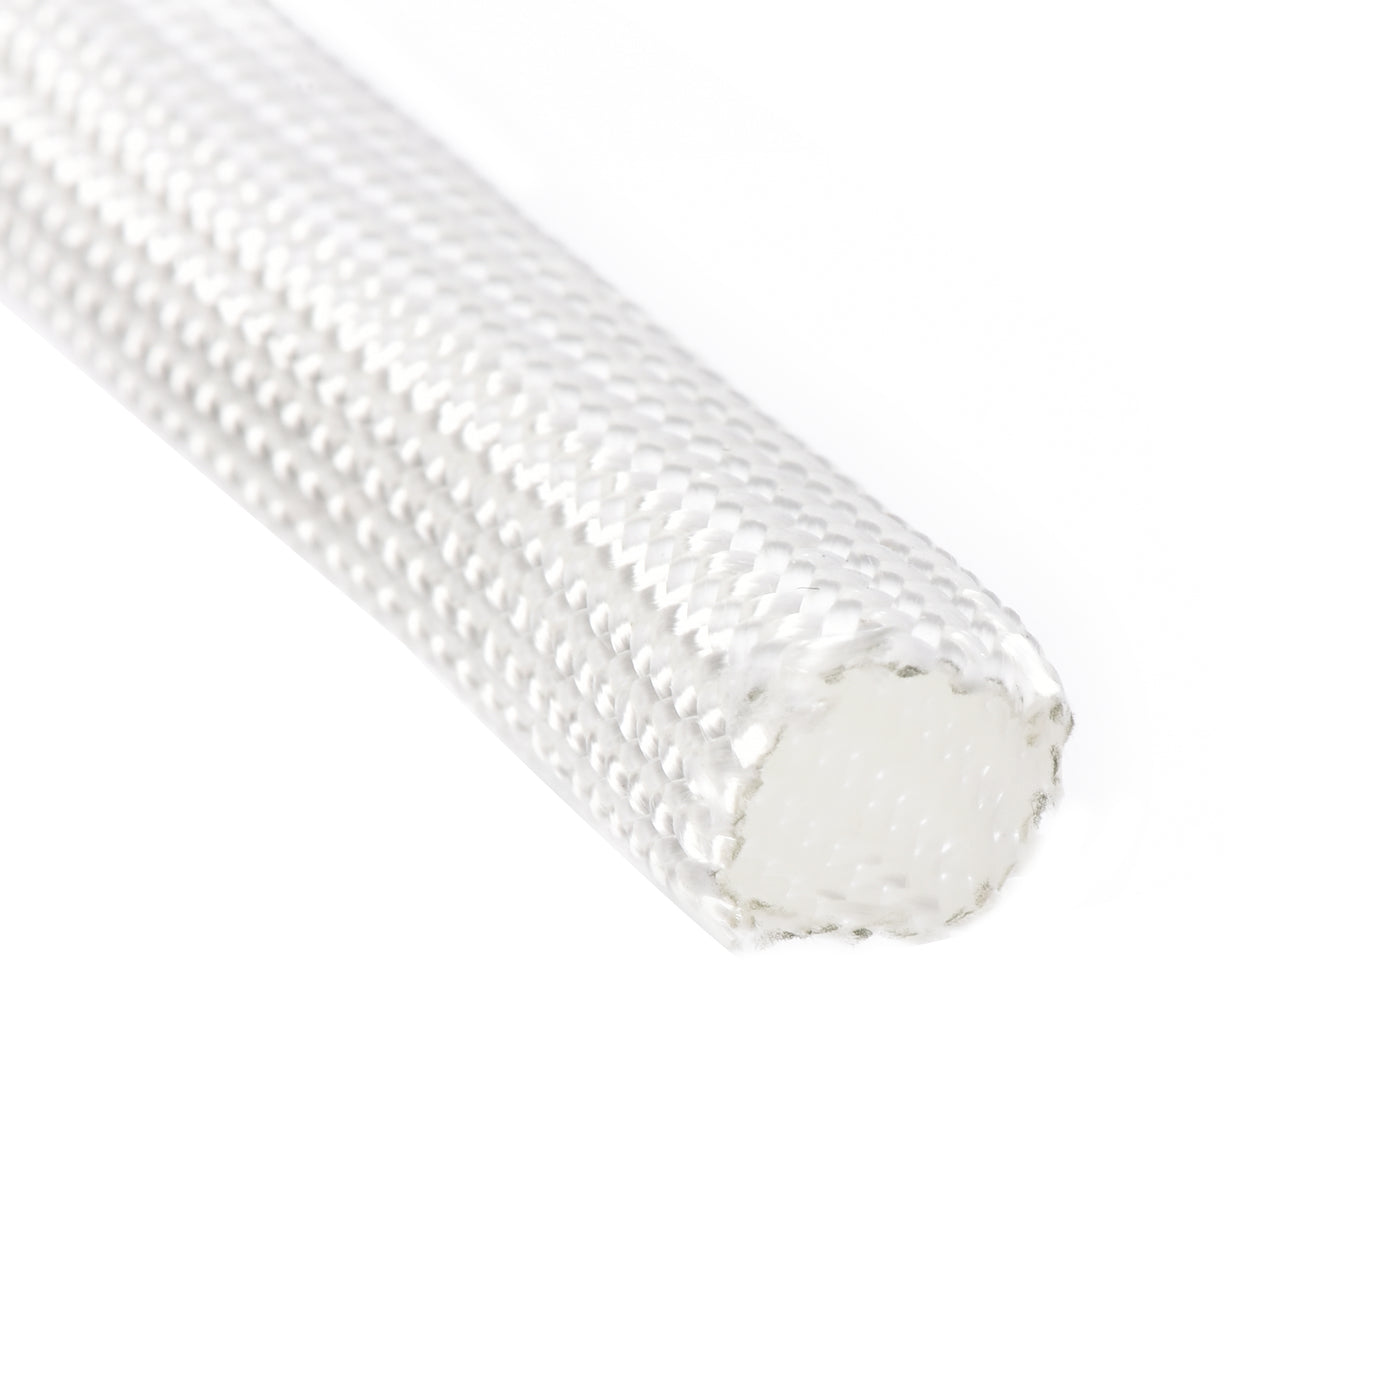 uxcell Uxcell Insulation Cable Protector, 33Ft-7mm High TEMP Fiberglass Sleeve White